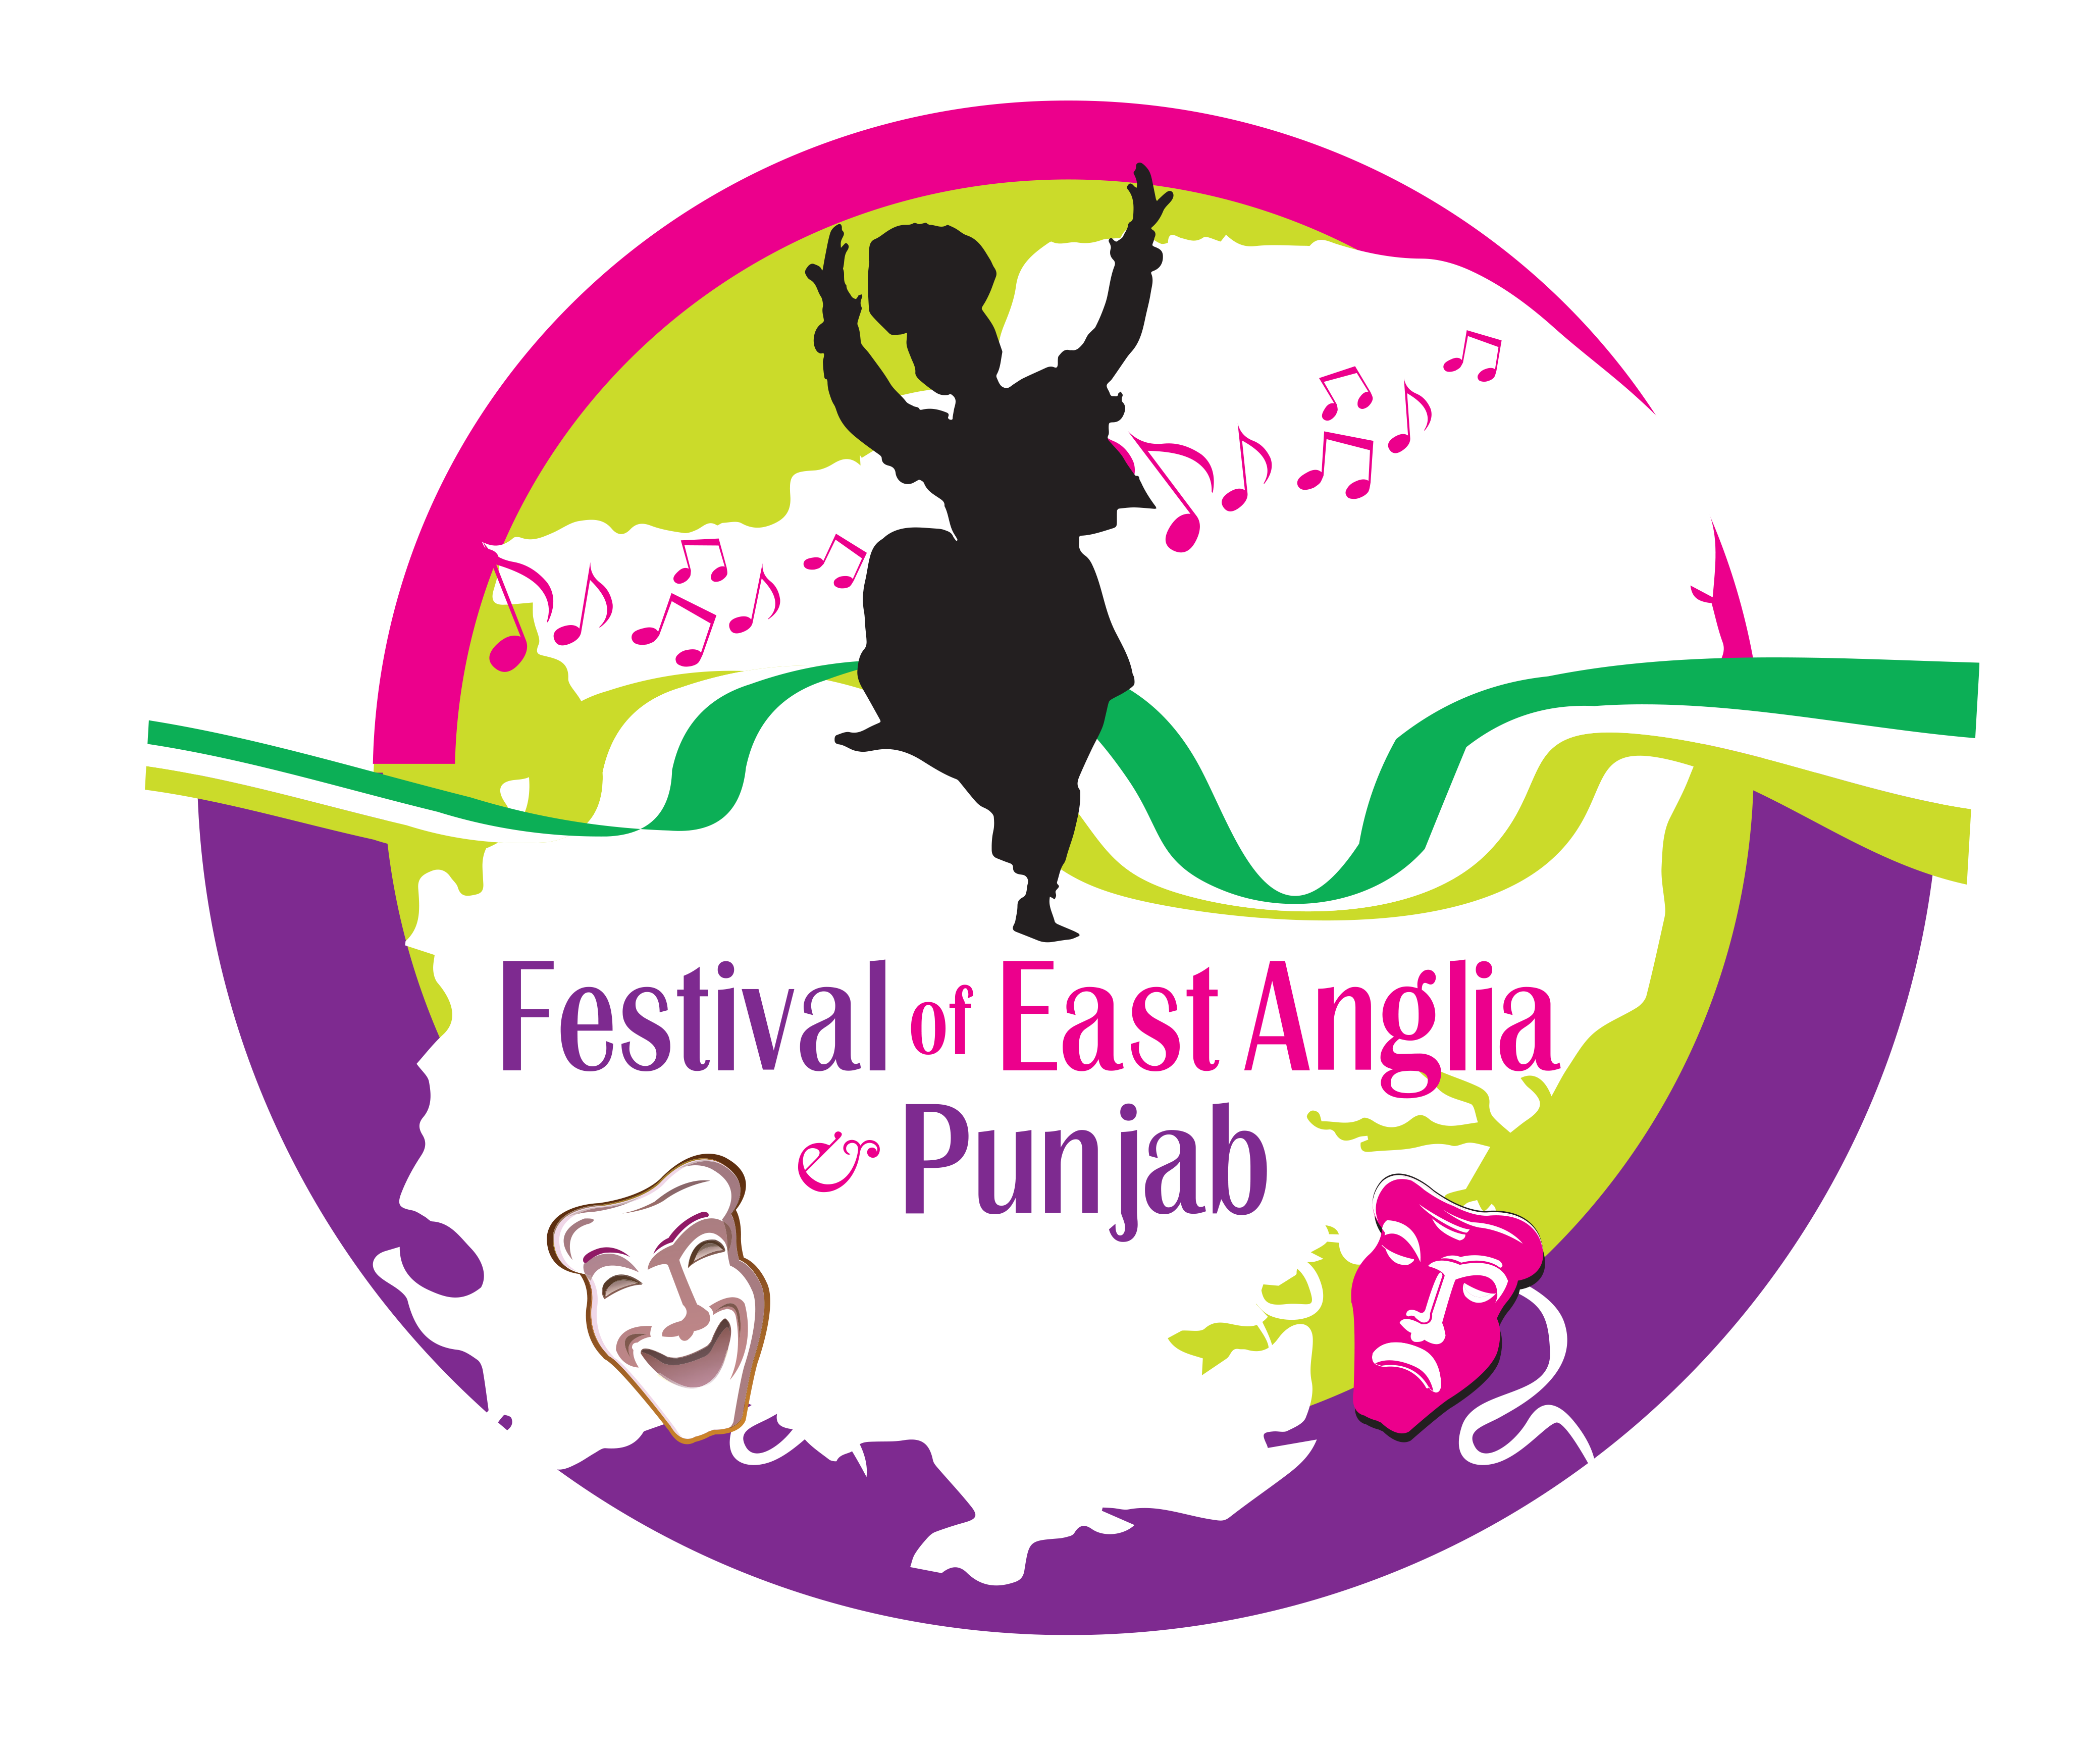 Colourful and lively badge for the Festival of East Anglia and Punjab